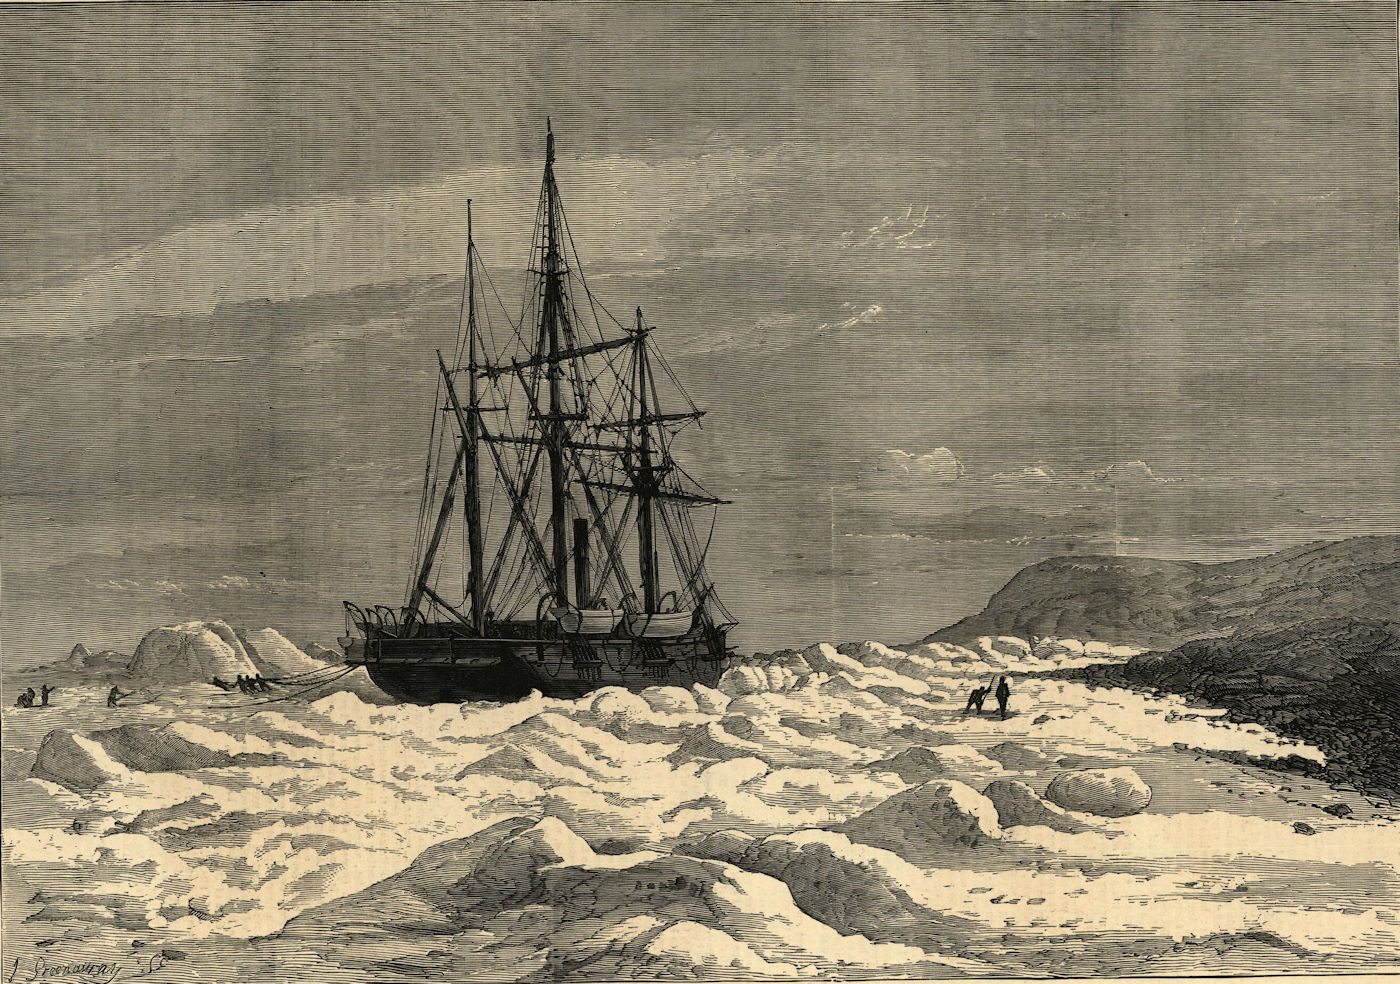 Associate Product The North Pole expedition: the Alert trapped by ice, Cape Beechey. Arctic 1876